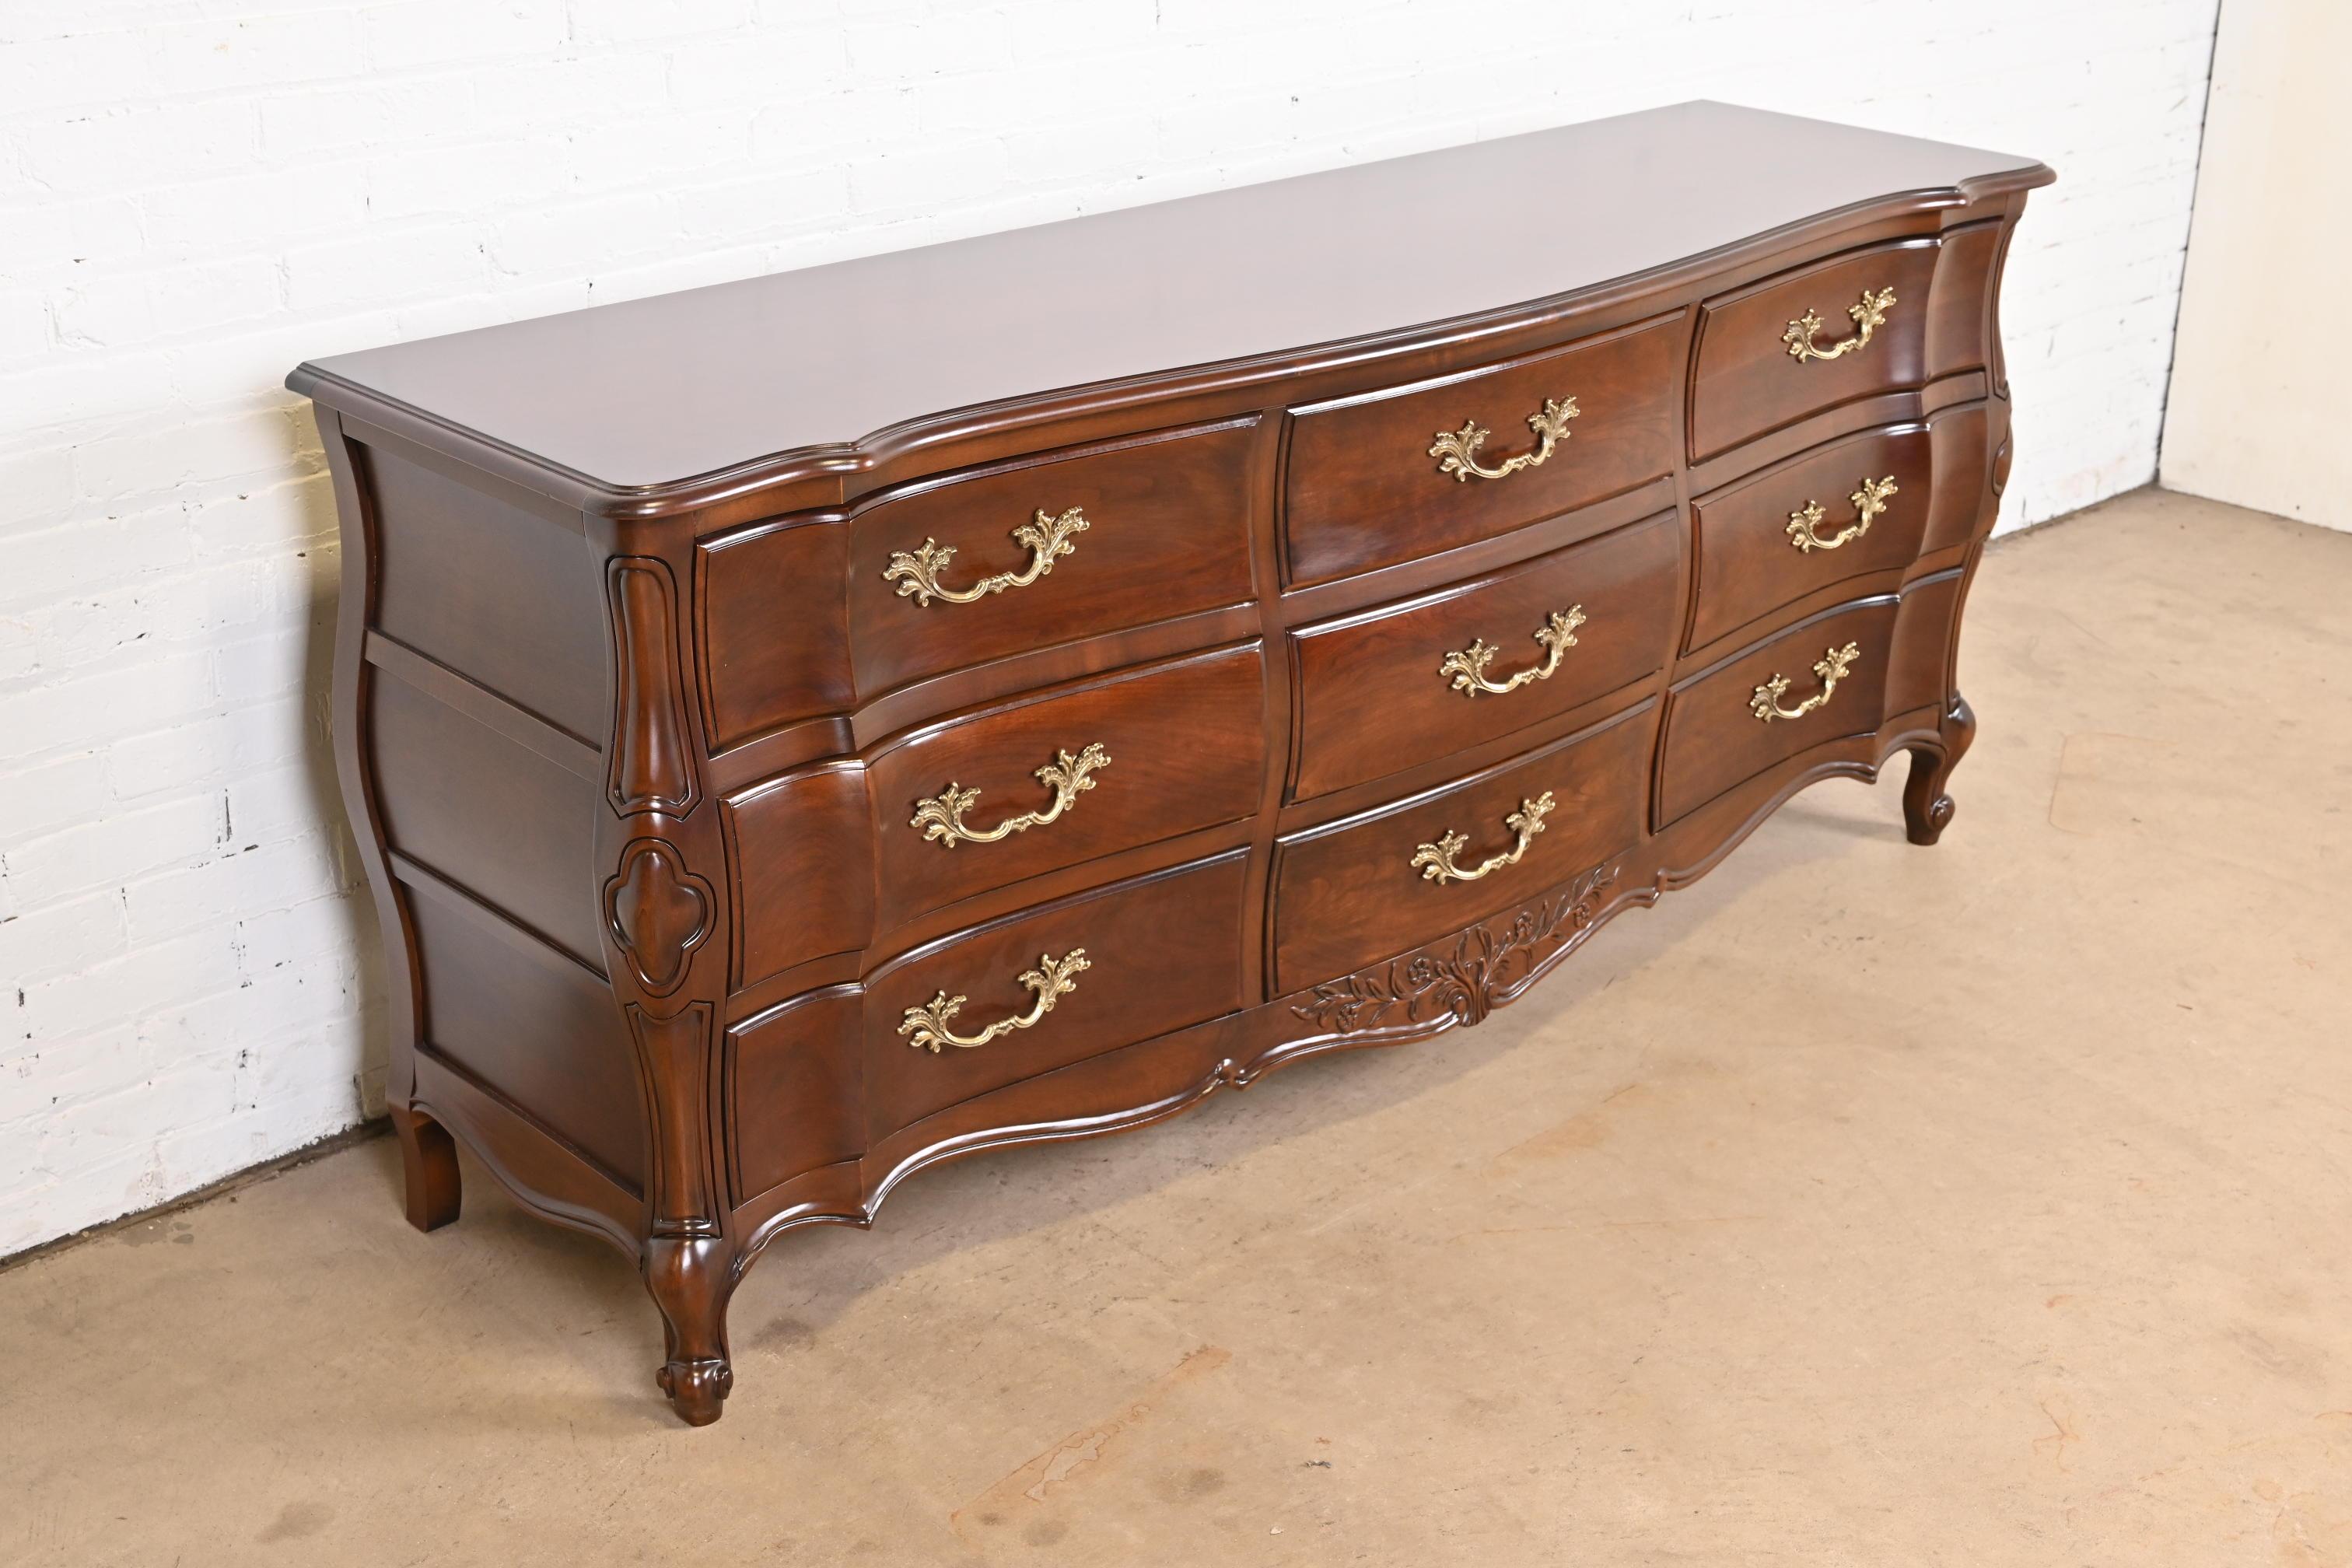 20th Century French Provincial Louis XV Cherry Wood Dresser by White Furniture, Refinished For Sale